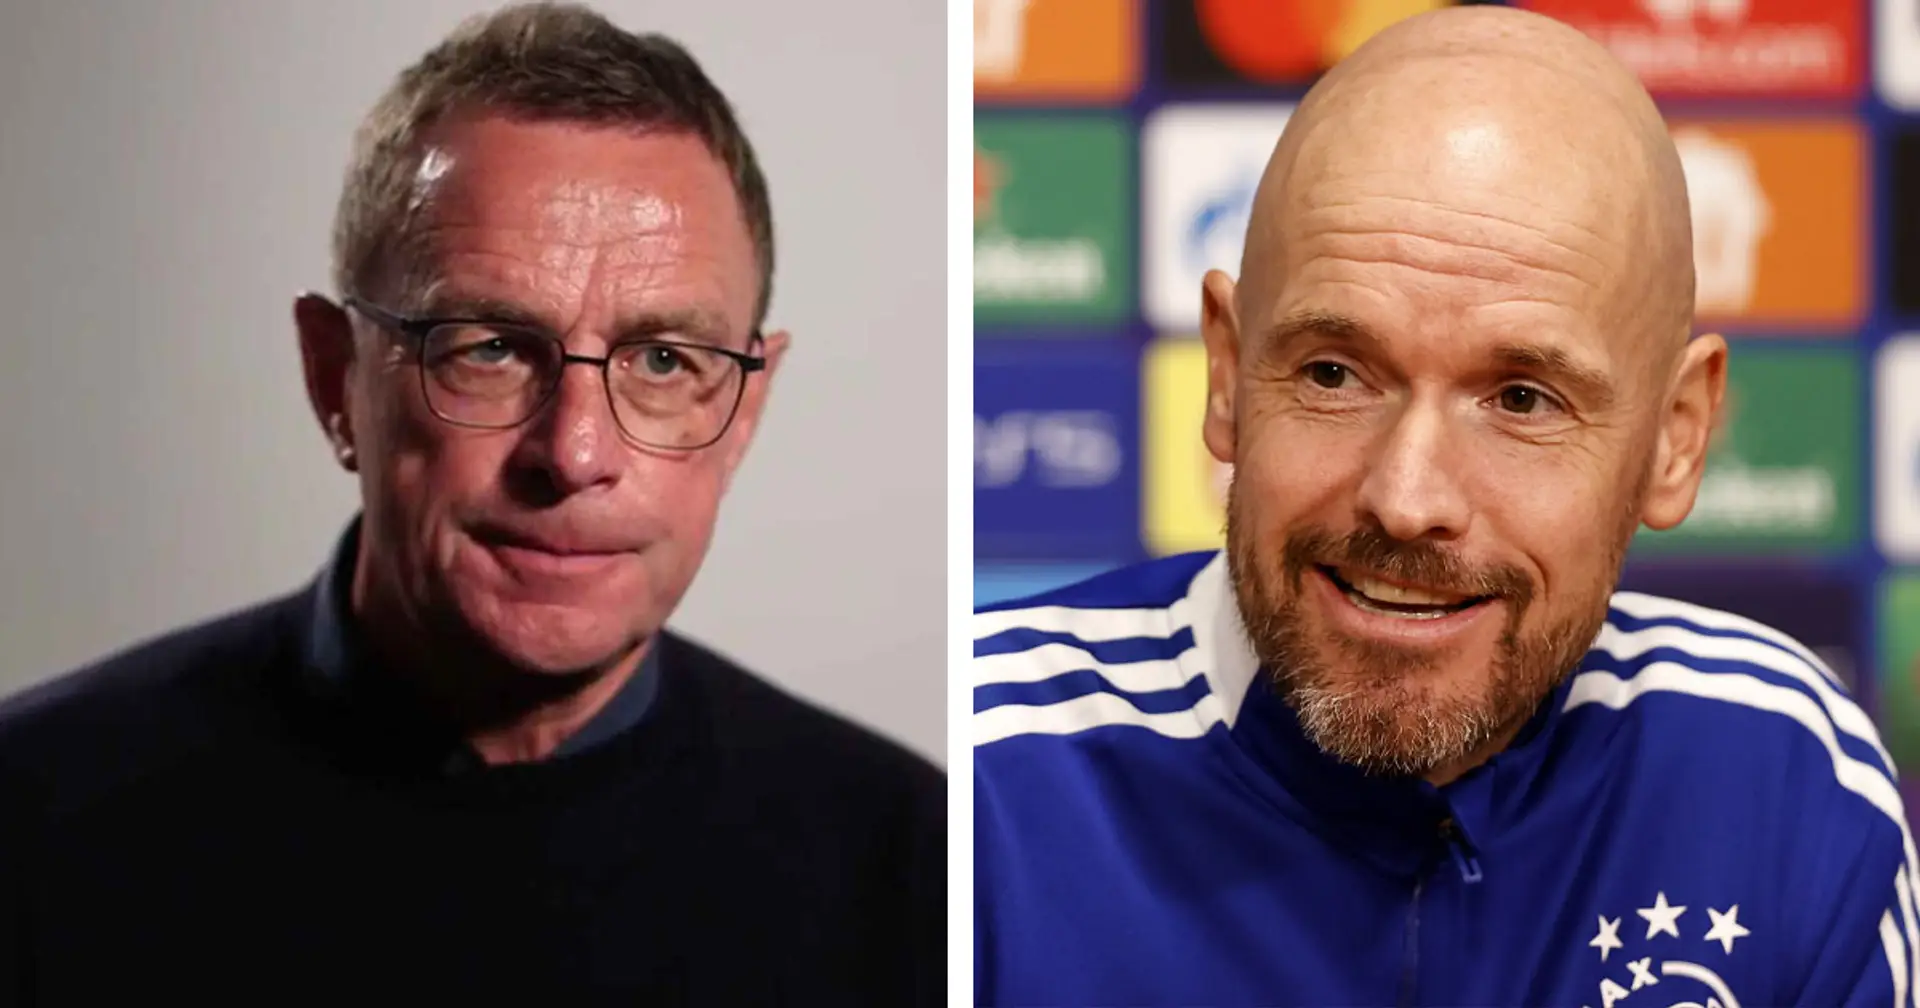 ‘We’ll definitely speak’: Rangnick reveals when he plans to have chat with Ten Hag